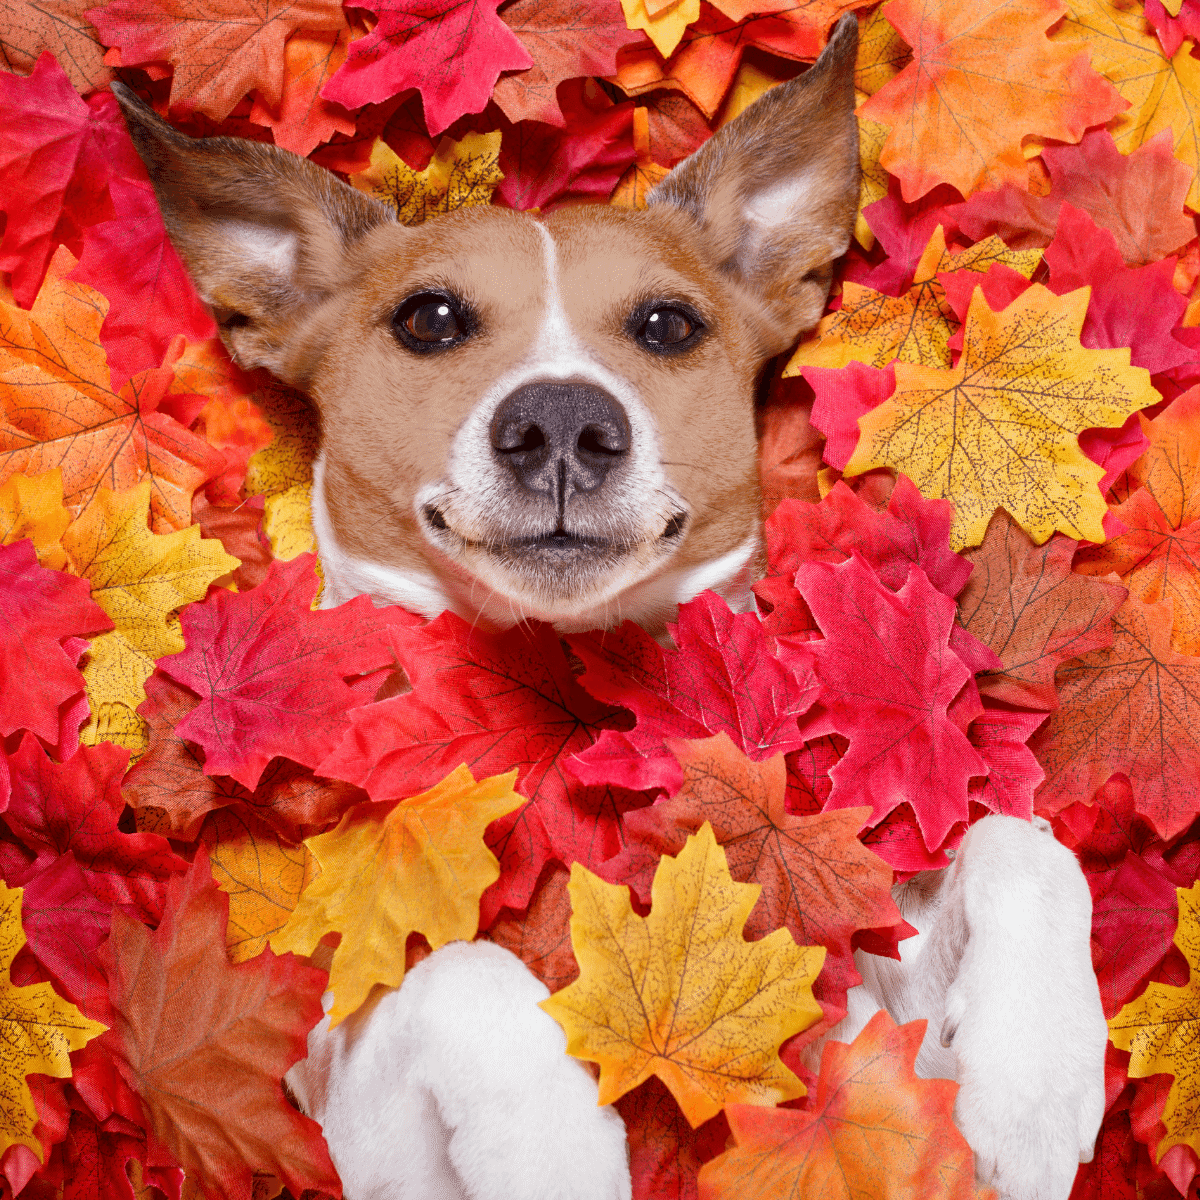 Brown and white dog looking into the camera in a bed of leaves that are red and orange in the fall